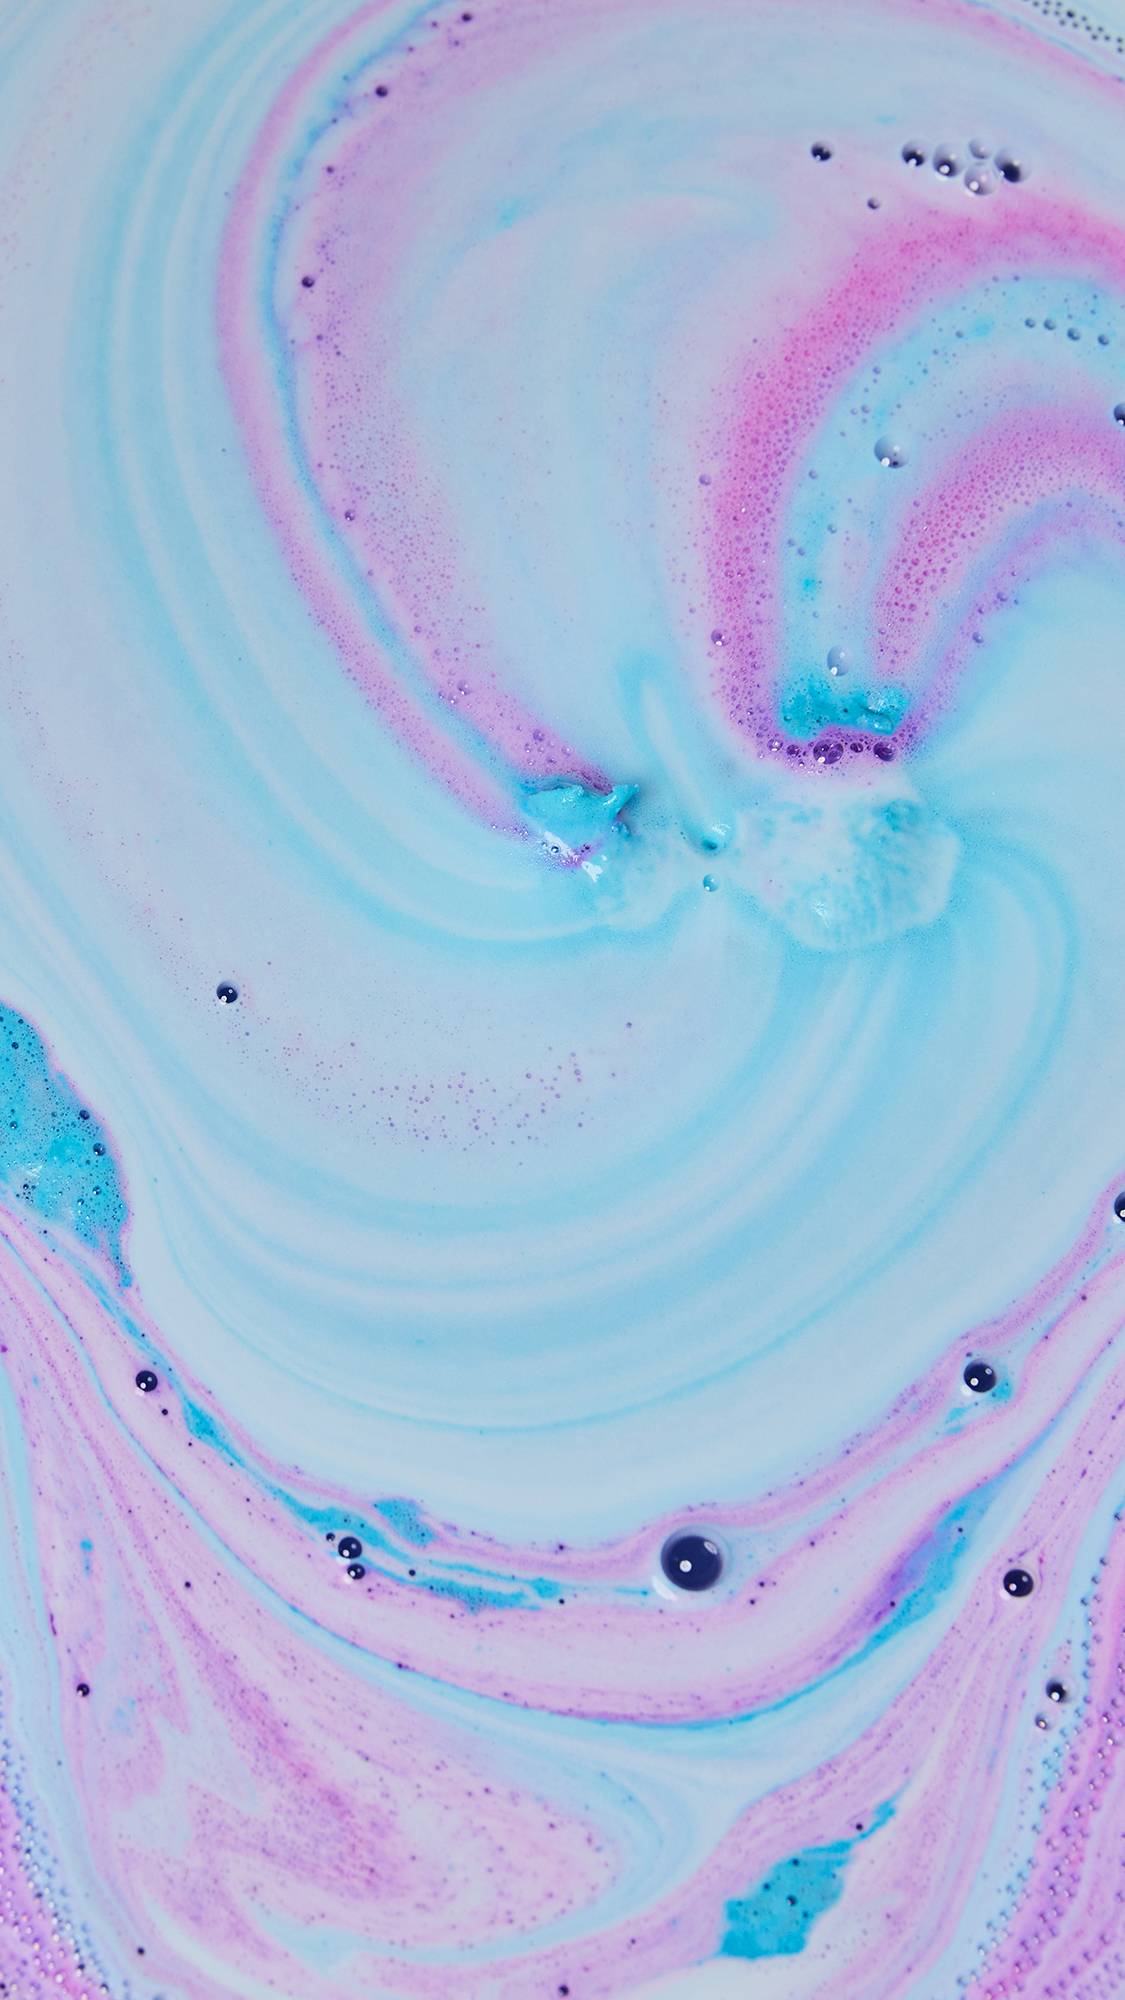 The Bunny Moon bath bomb has nearly fully dissolved leaving a galaxy of pink, blue and purple foamy ripples.